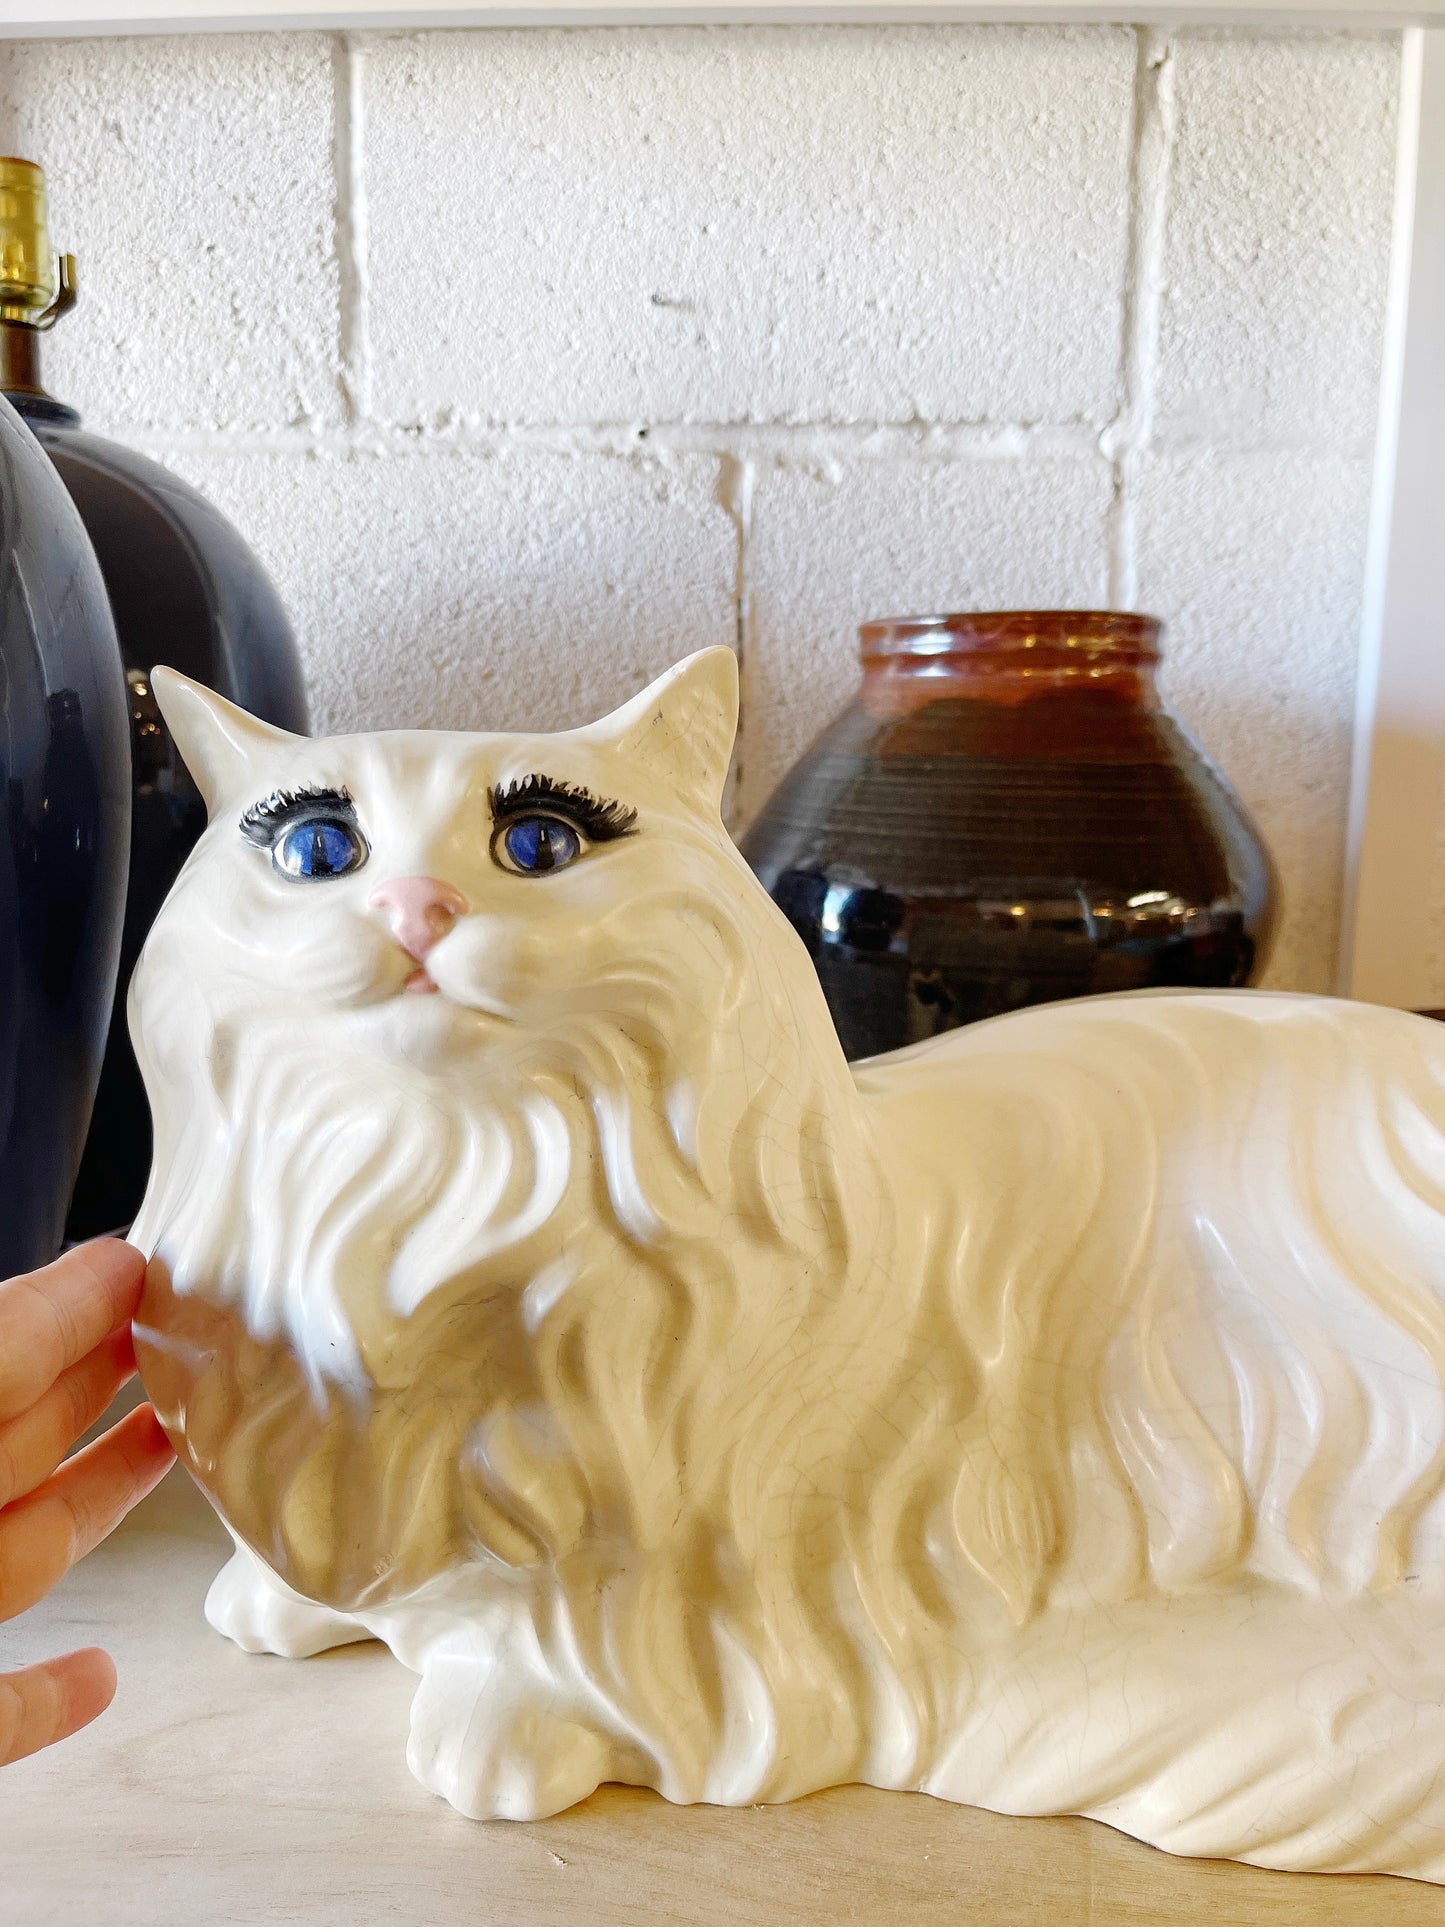 Vintage White Persian Ceramic Cat with Dreamy Eyes